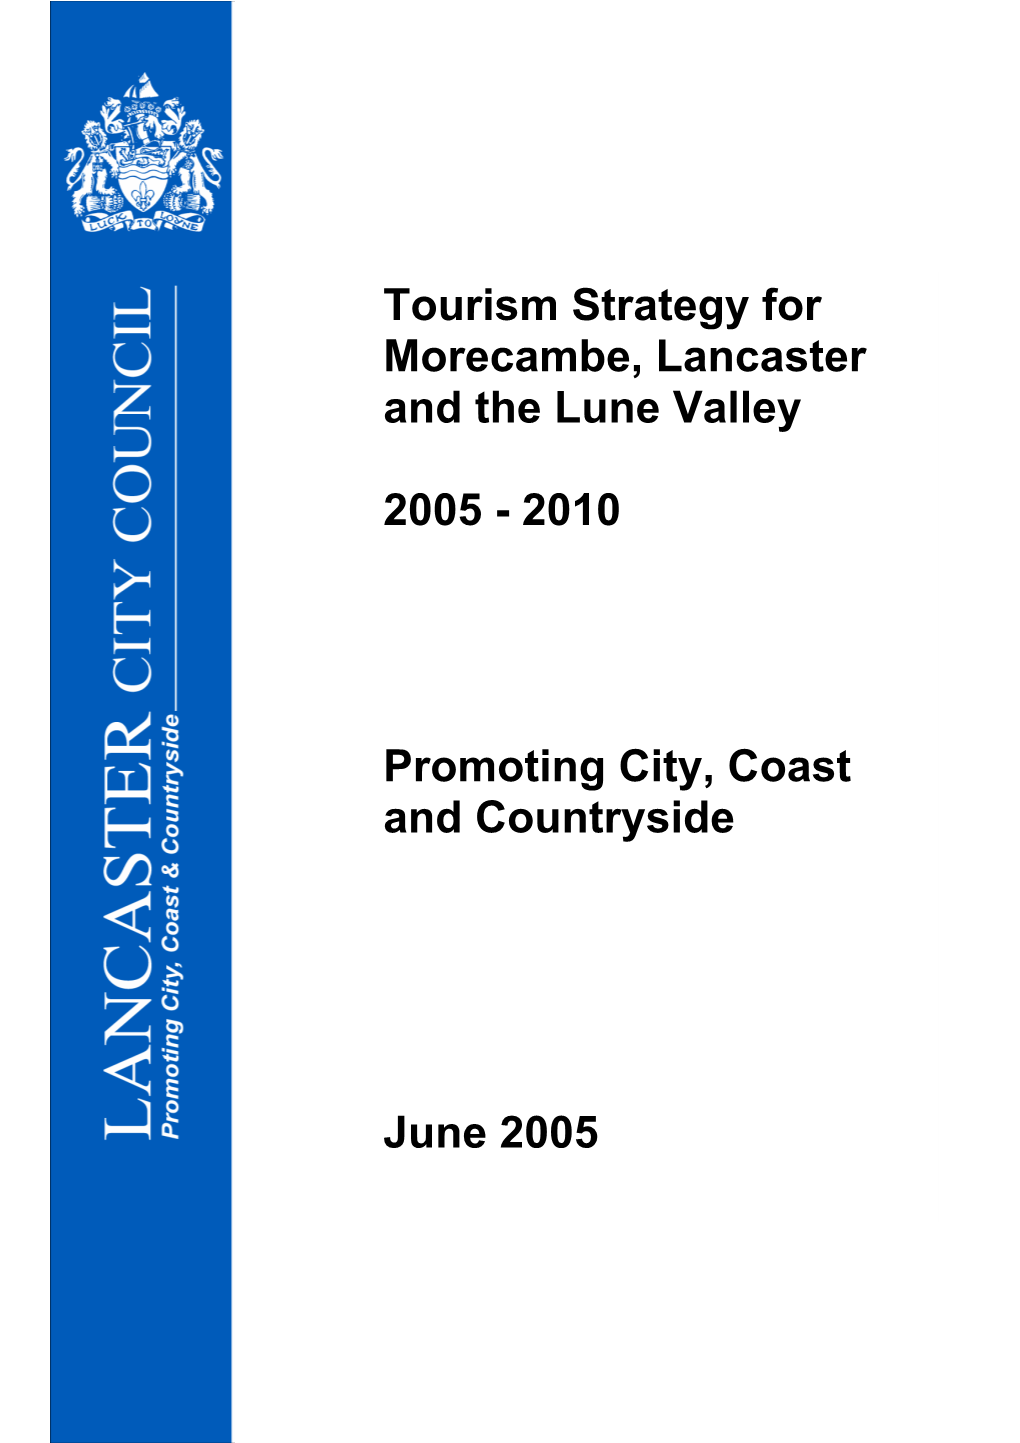 Tourism Strategy for Morecambe, Lancaster and the Lune Valley 2005